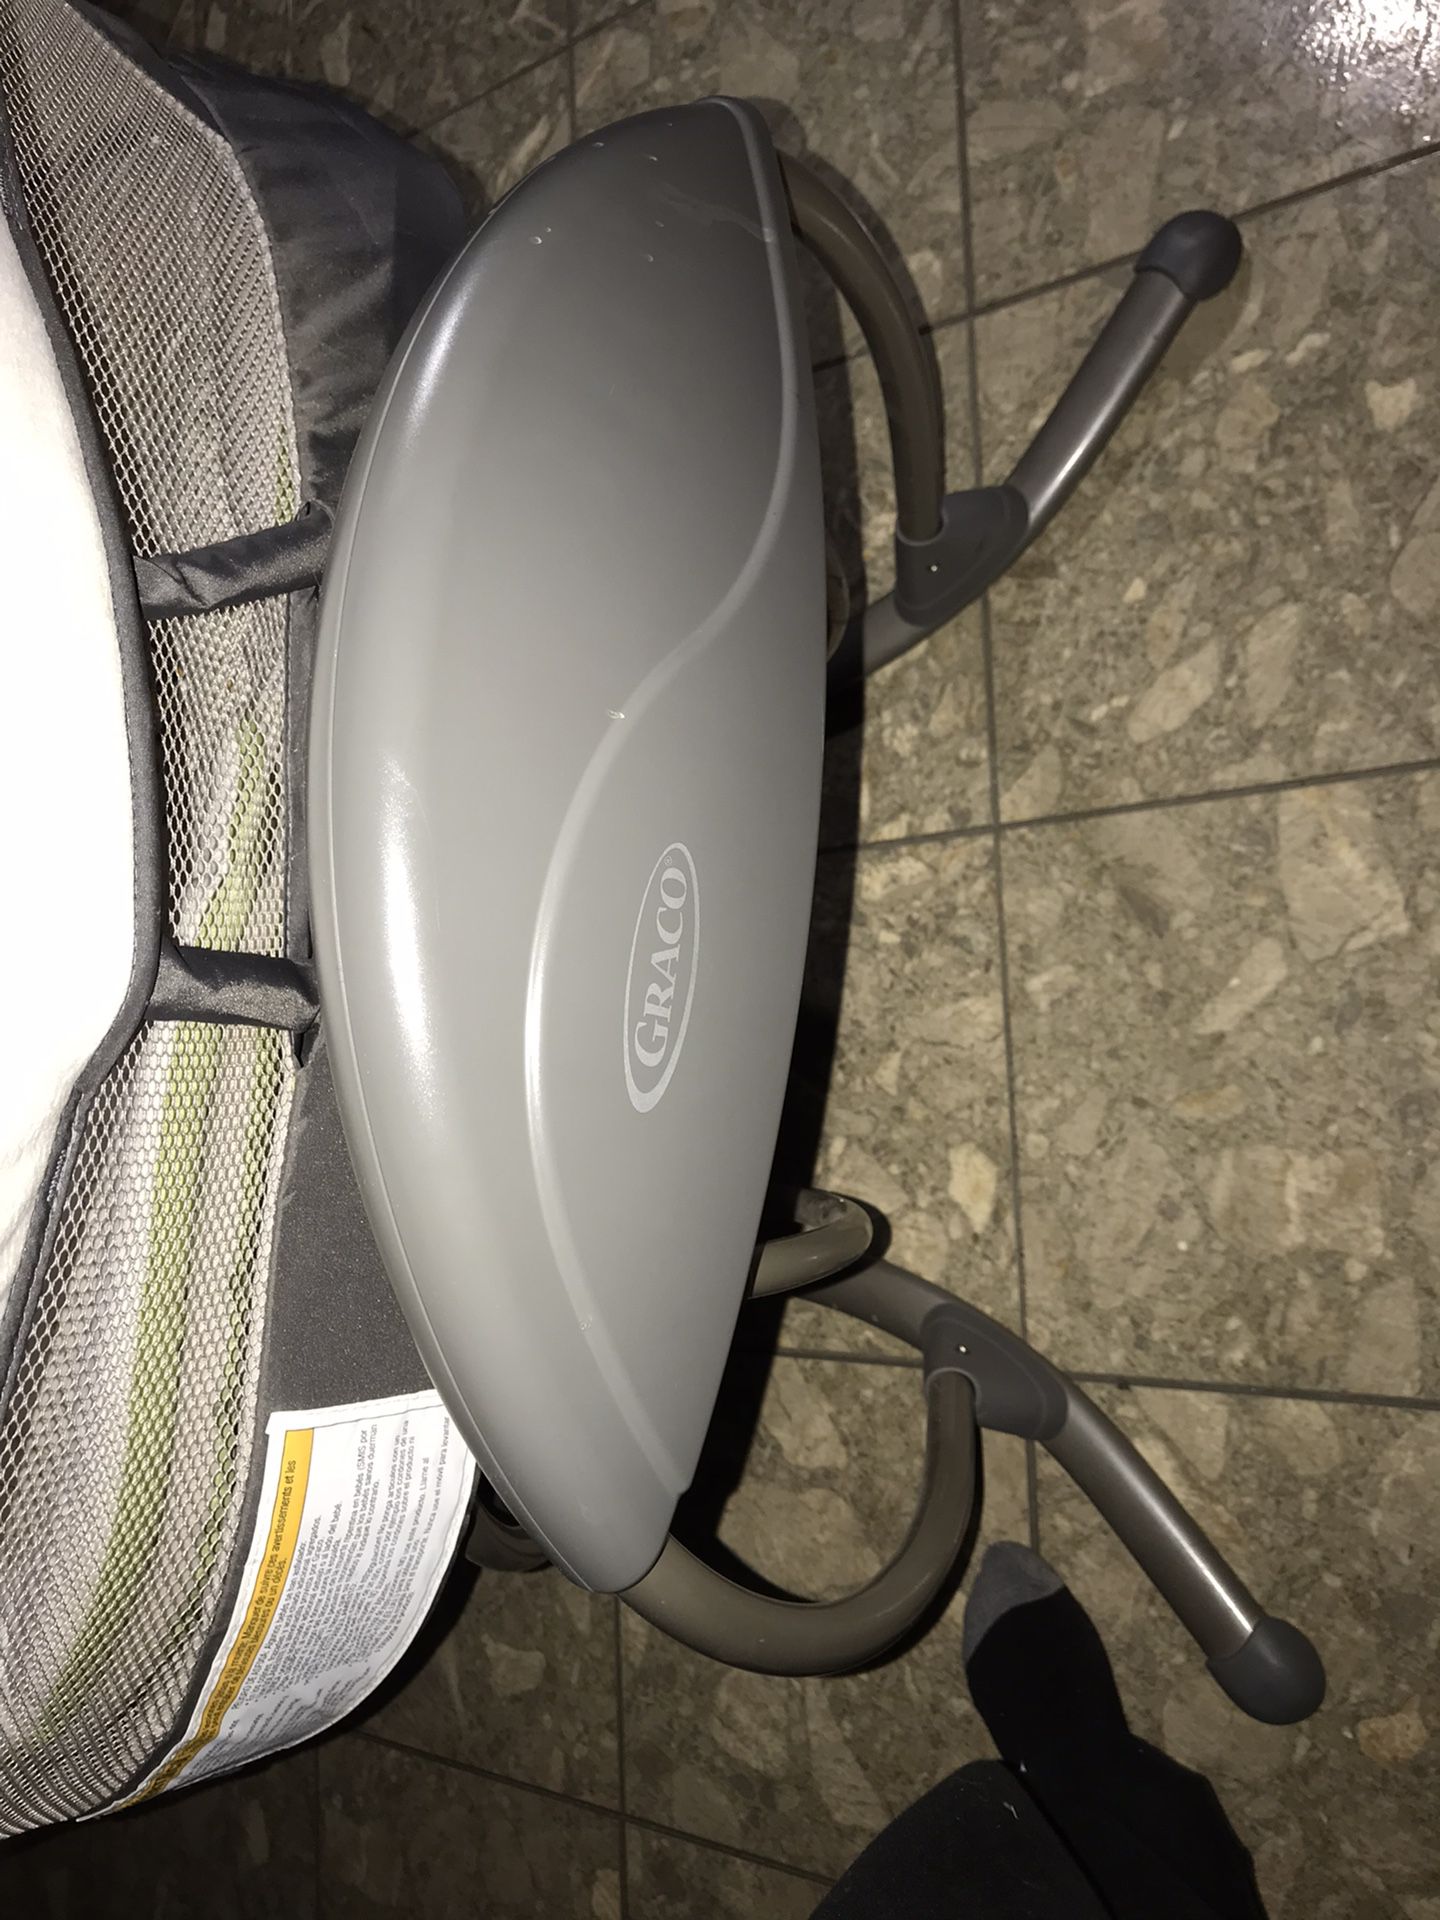 $100 Or b/O Graco  Cradle That Swings, Vibrates & Has A Noise Machine On It 